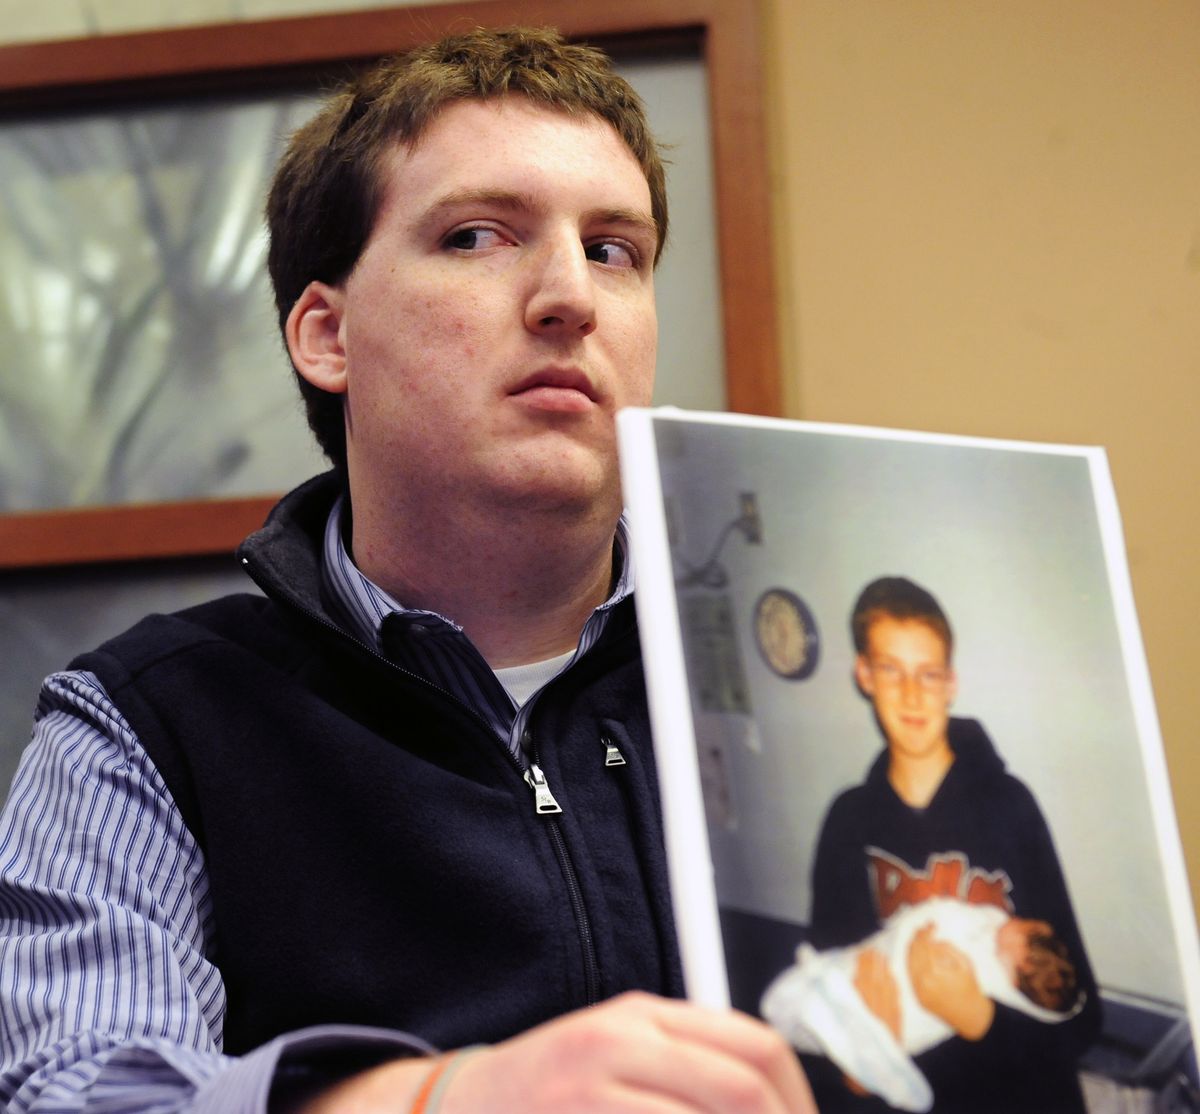 FILE - In this Dec. 8, 2011 file photo, Zach Tomaselli, 23, holds a photo of himself and his brother taken at about the time he claims he was was sexually abused in 2002 by former Syracuse basketball coach Bernie Fine, at a news conference in Pittsburgh. Federal authorities have dropped their investigation into sexual abuse claims that cost Fine his job, threw a top-ranked team into turmoil and threatened the career of Hall of Fame coach Jim Boeheim. After a probe spanning nearly a year, U.S. Attorney Richard Hartunian said Friday, Nov. 9, 2012 there was no evidence to support claims that Fine had molested a boy in 2002 in a Pittsburgh hotel room. The investigation erupted in the glare of a spotlight on child abuse shone by the Penn State University scandal that broke shortly beforehand, when Davis and Lang accused the longtime assistant of fondling them when they were teens. (John Heller / Fr48174 Ap)